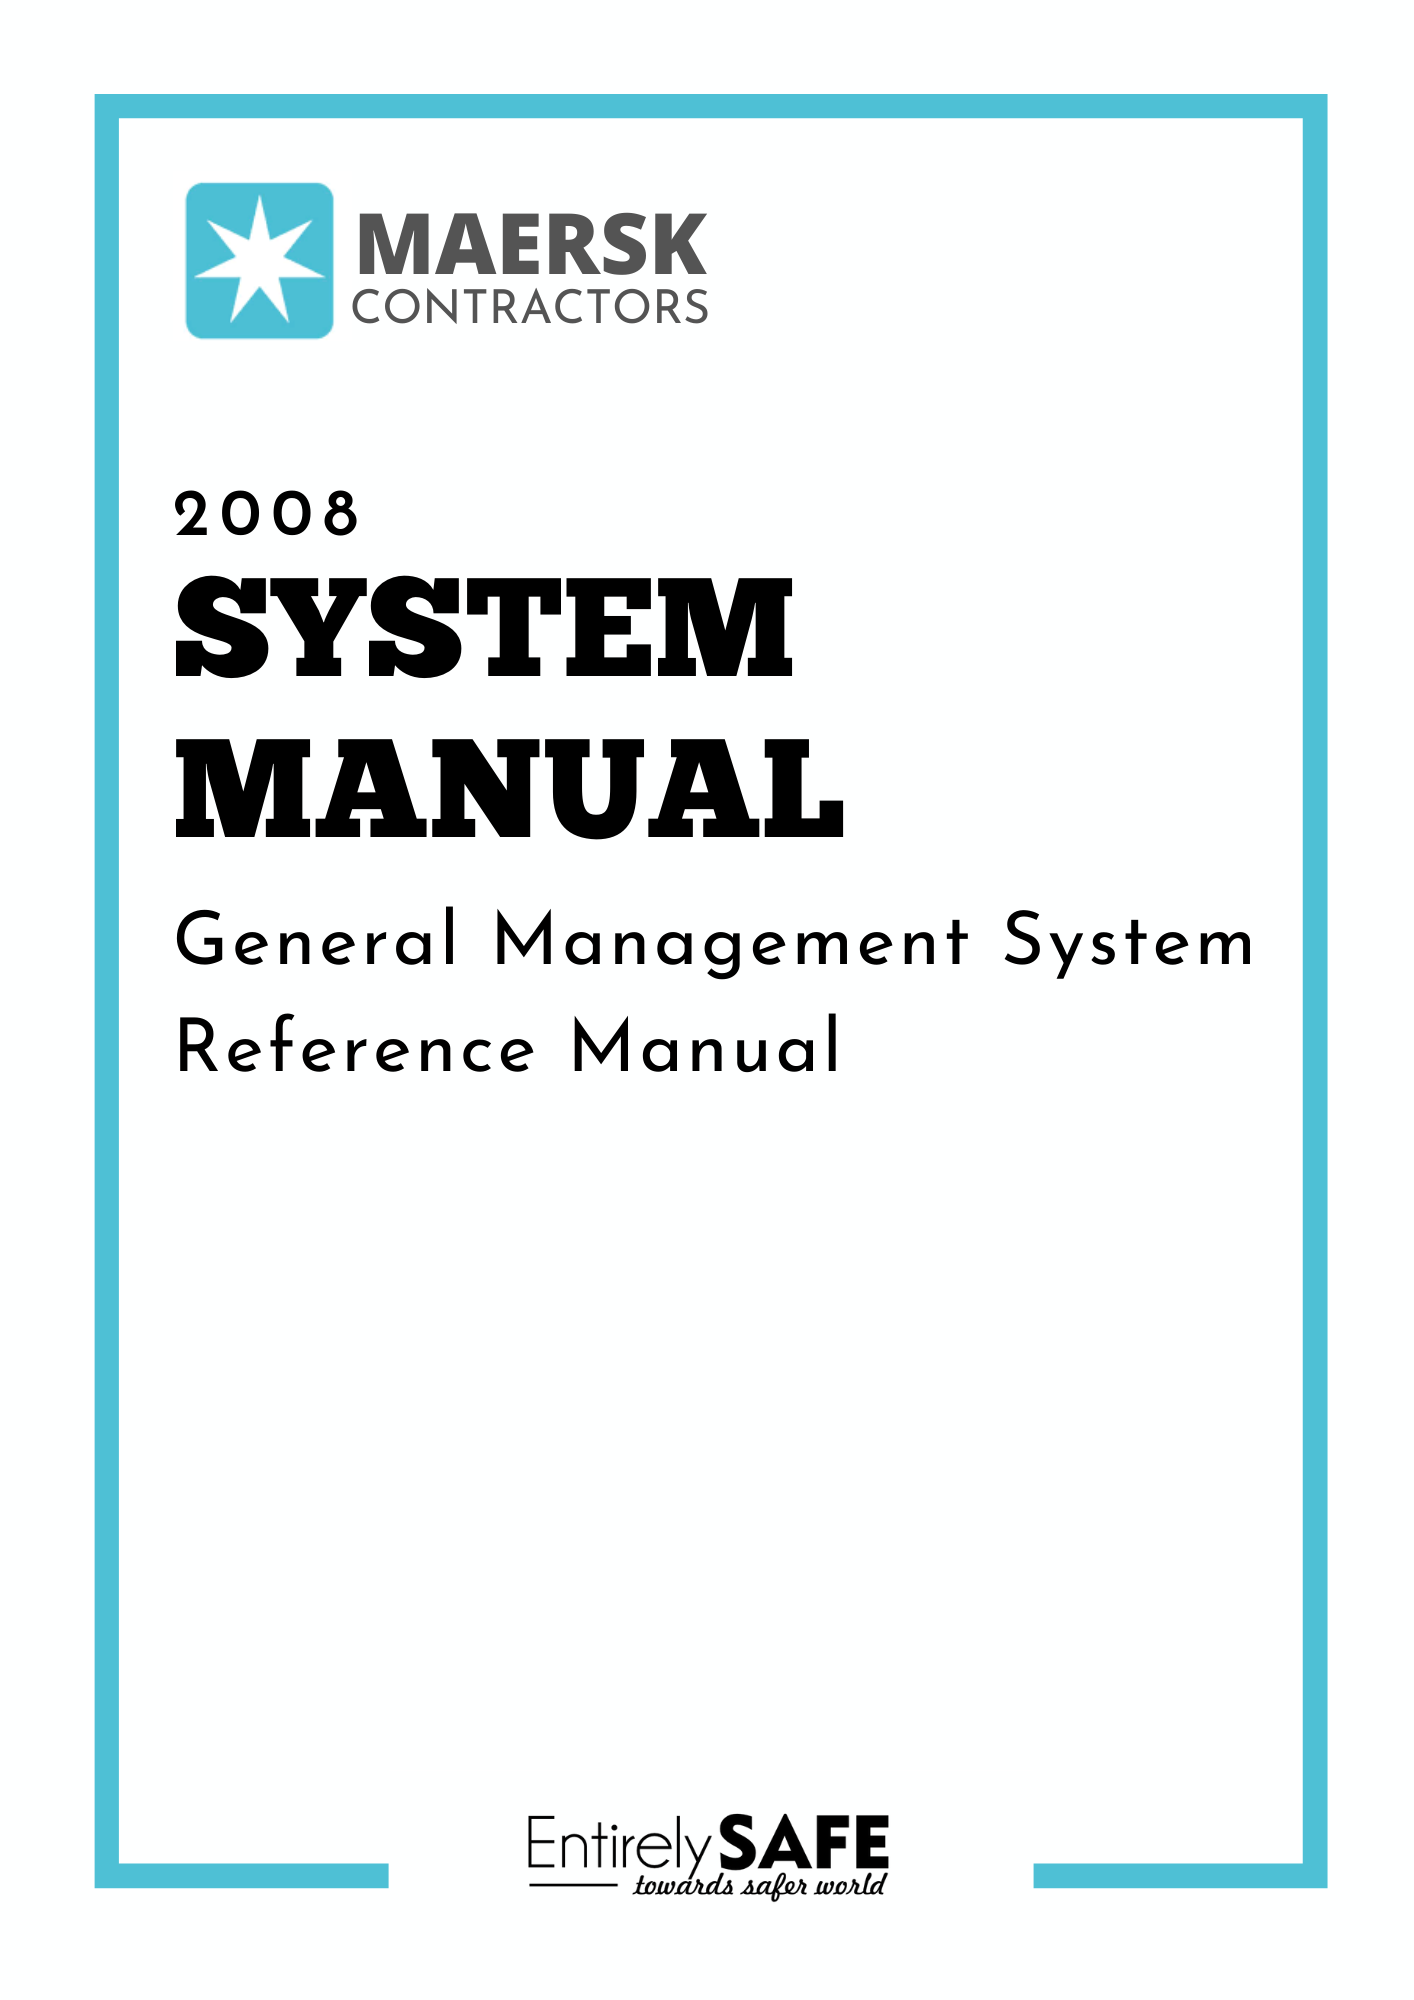 #147-FREE-Download-System-Manual-Maersk-Contractors